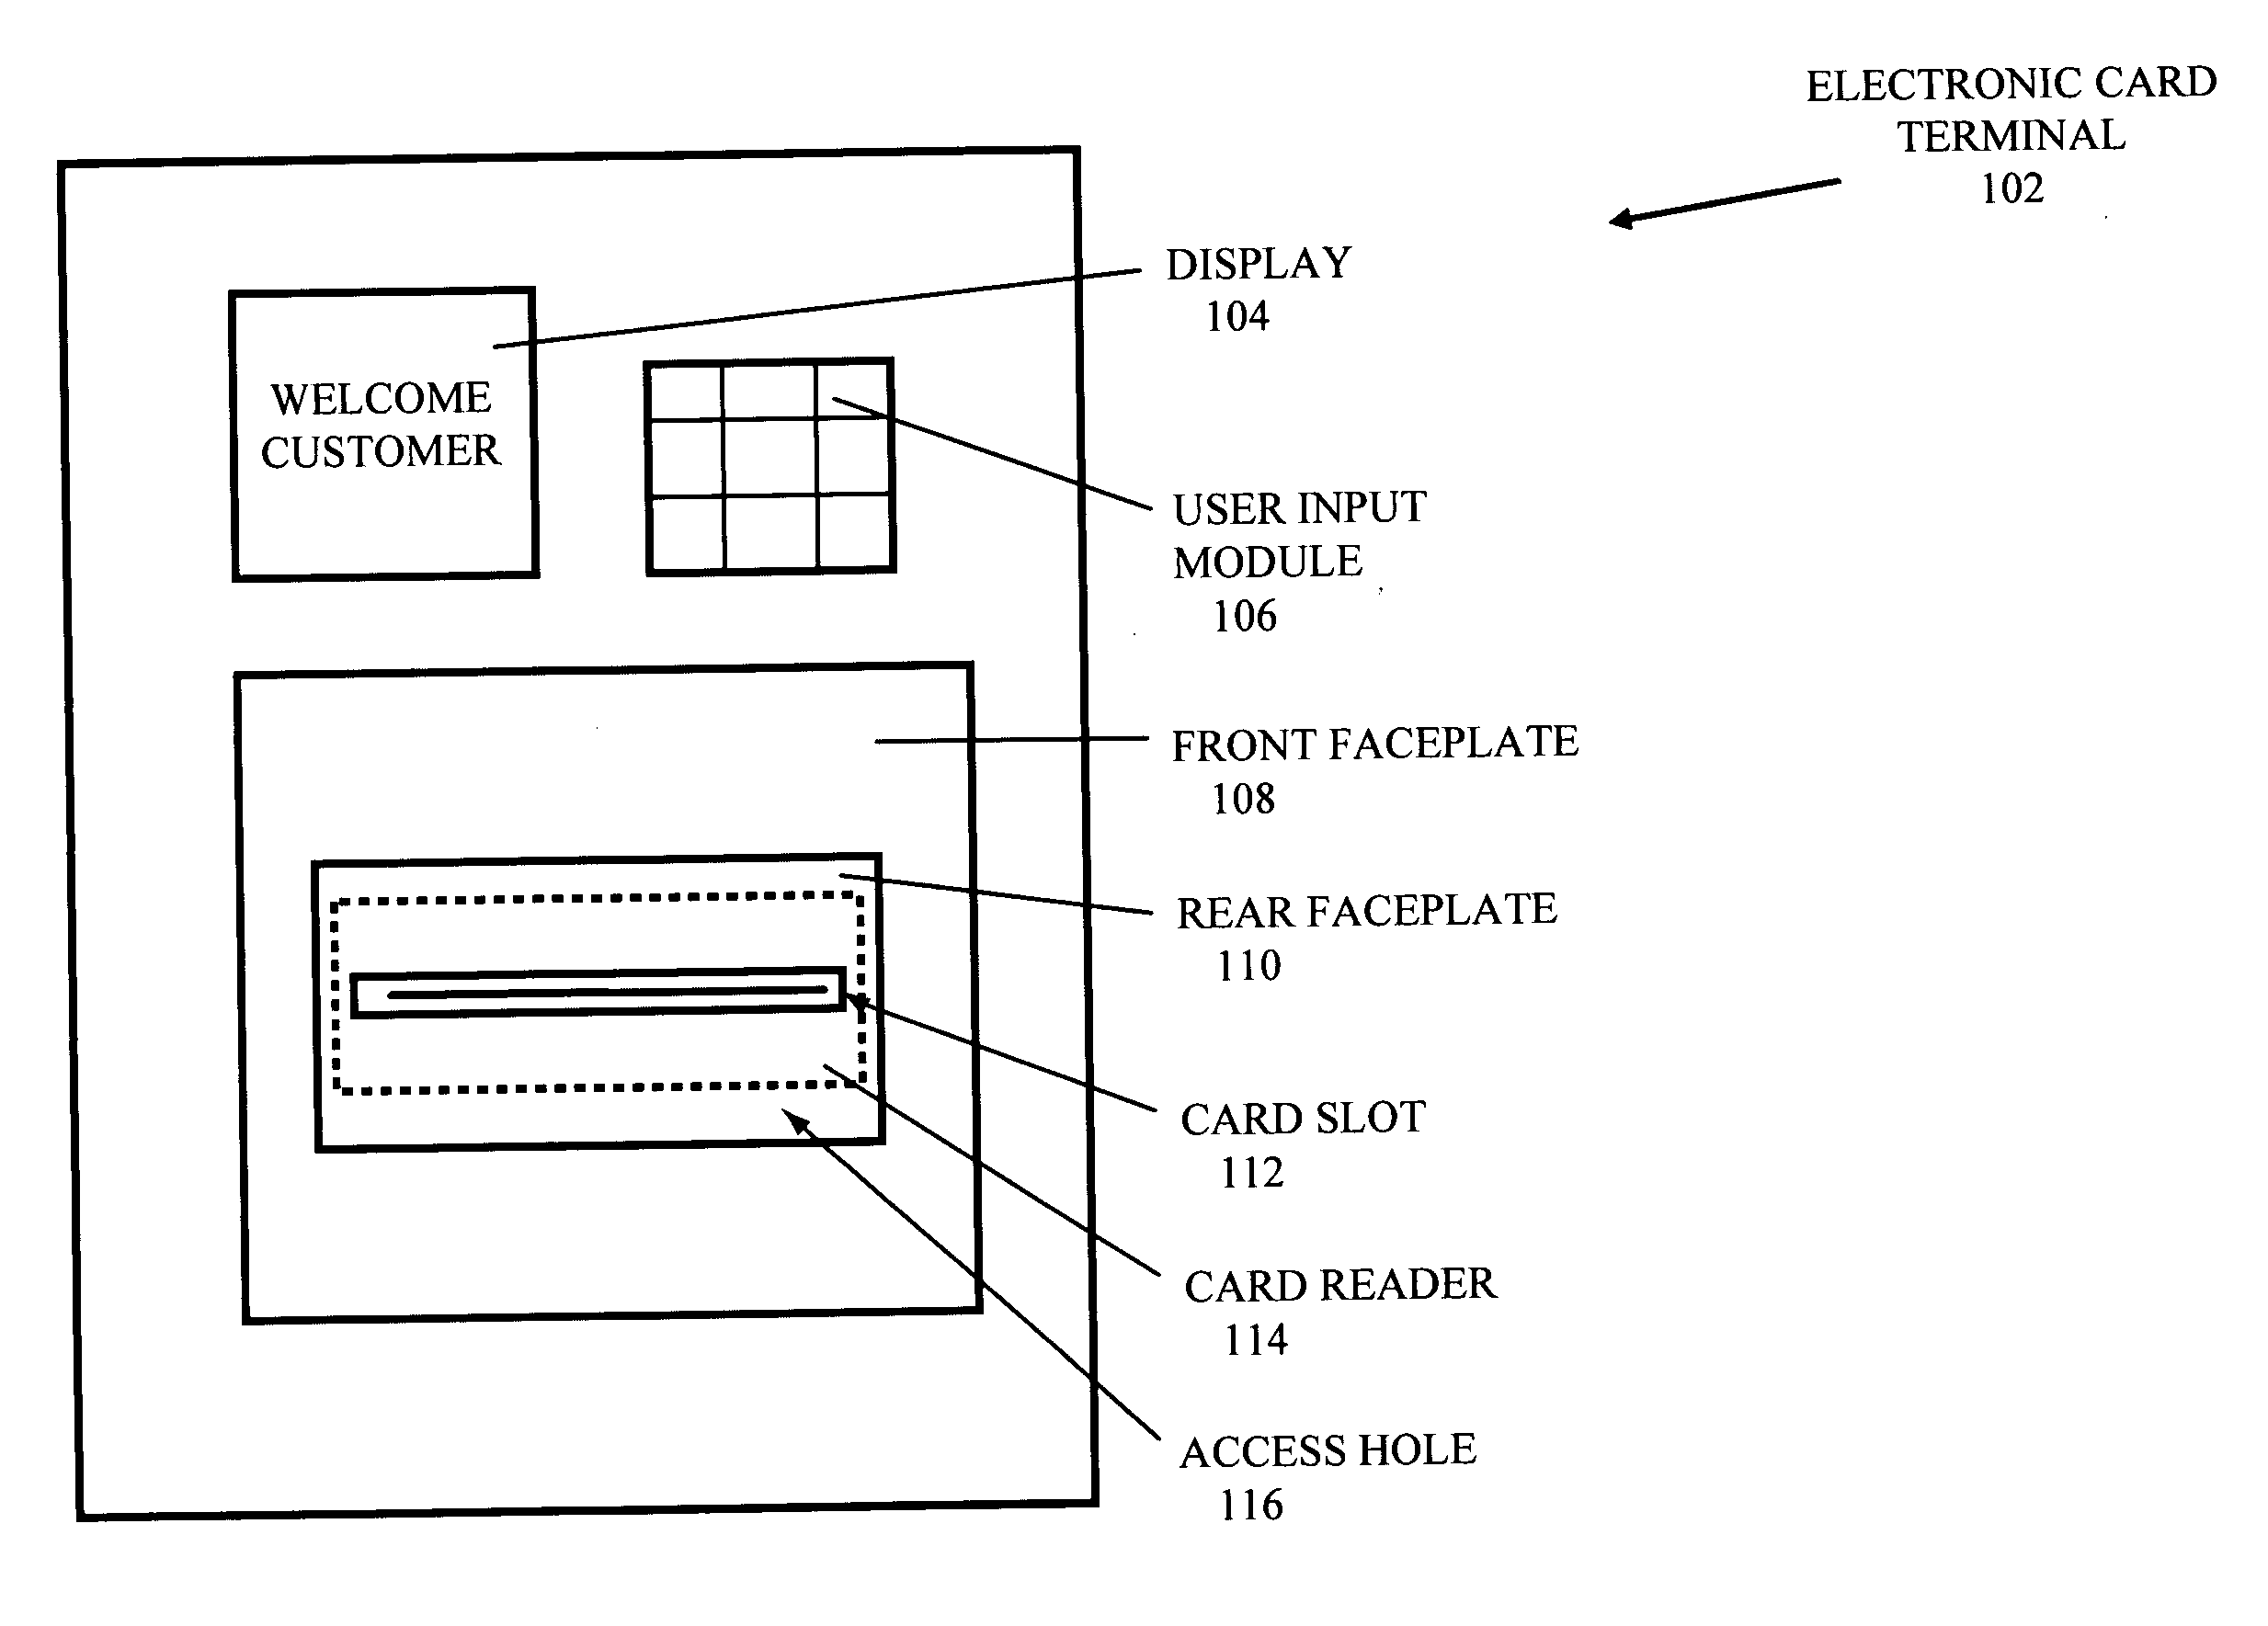 Systems and methods for preventing use of card skimmers on electronic card terminals